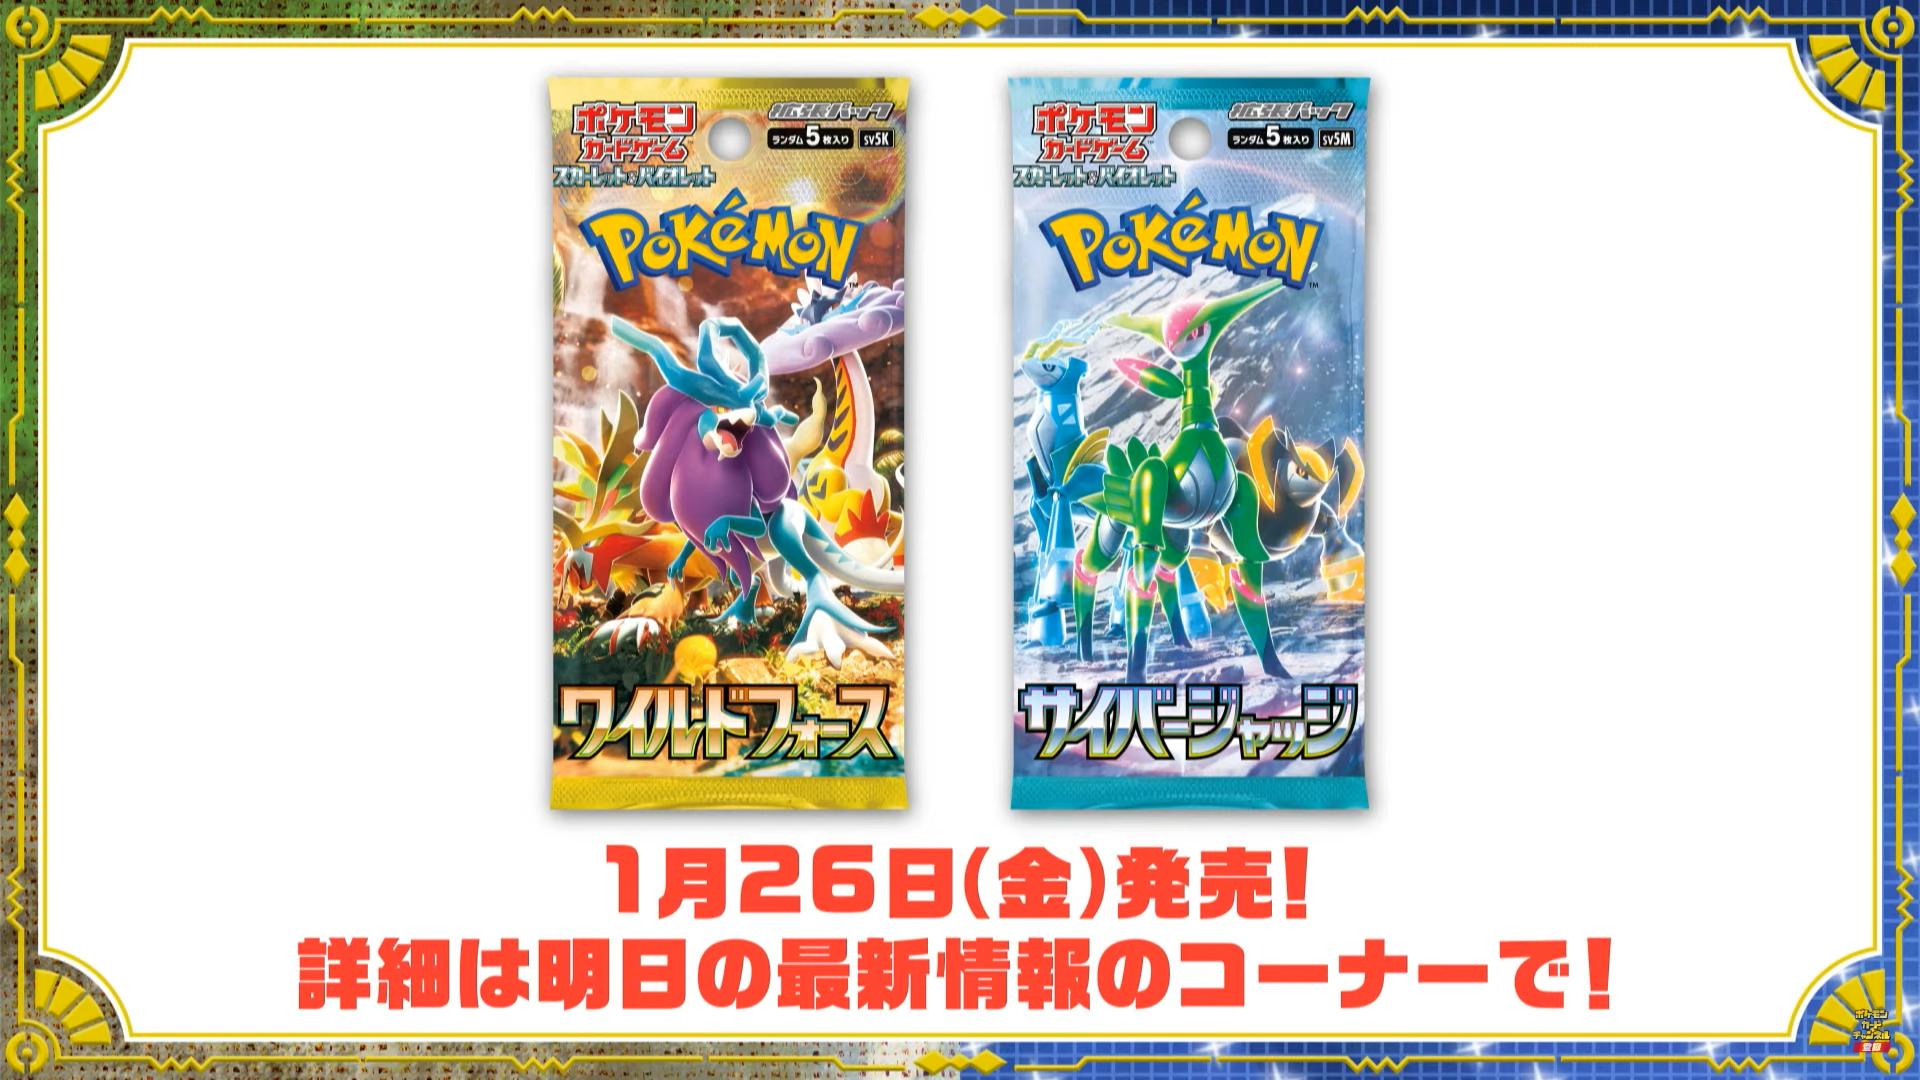 Booster packs for Wild Force and Cyber Judge